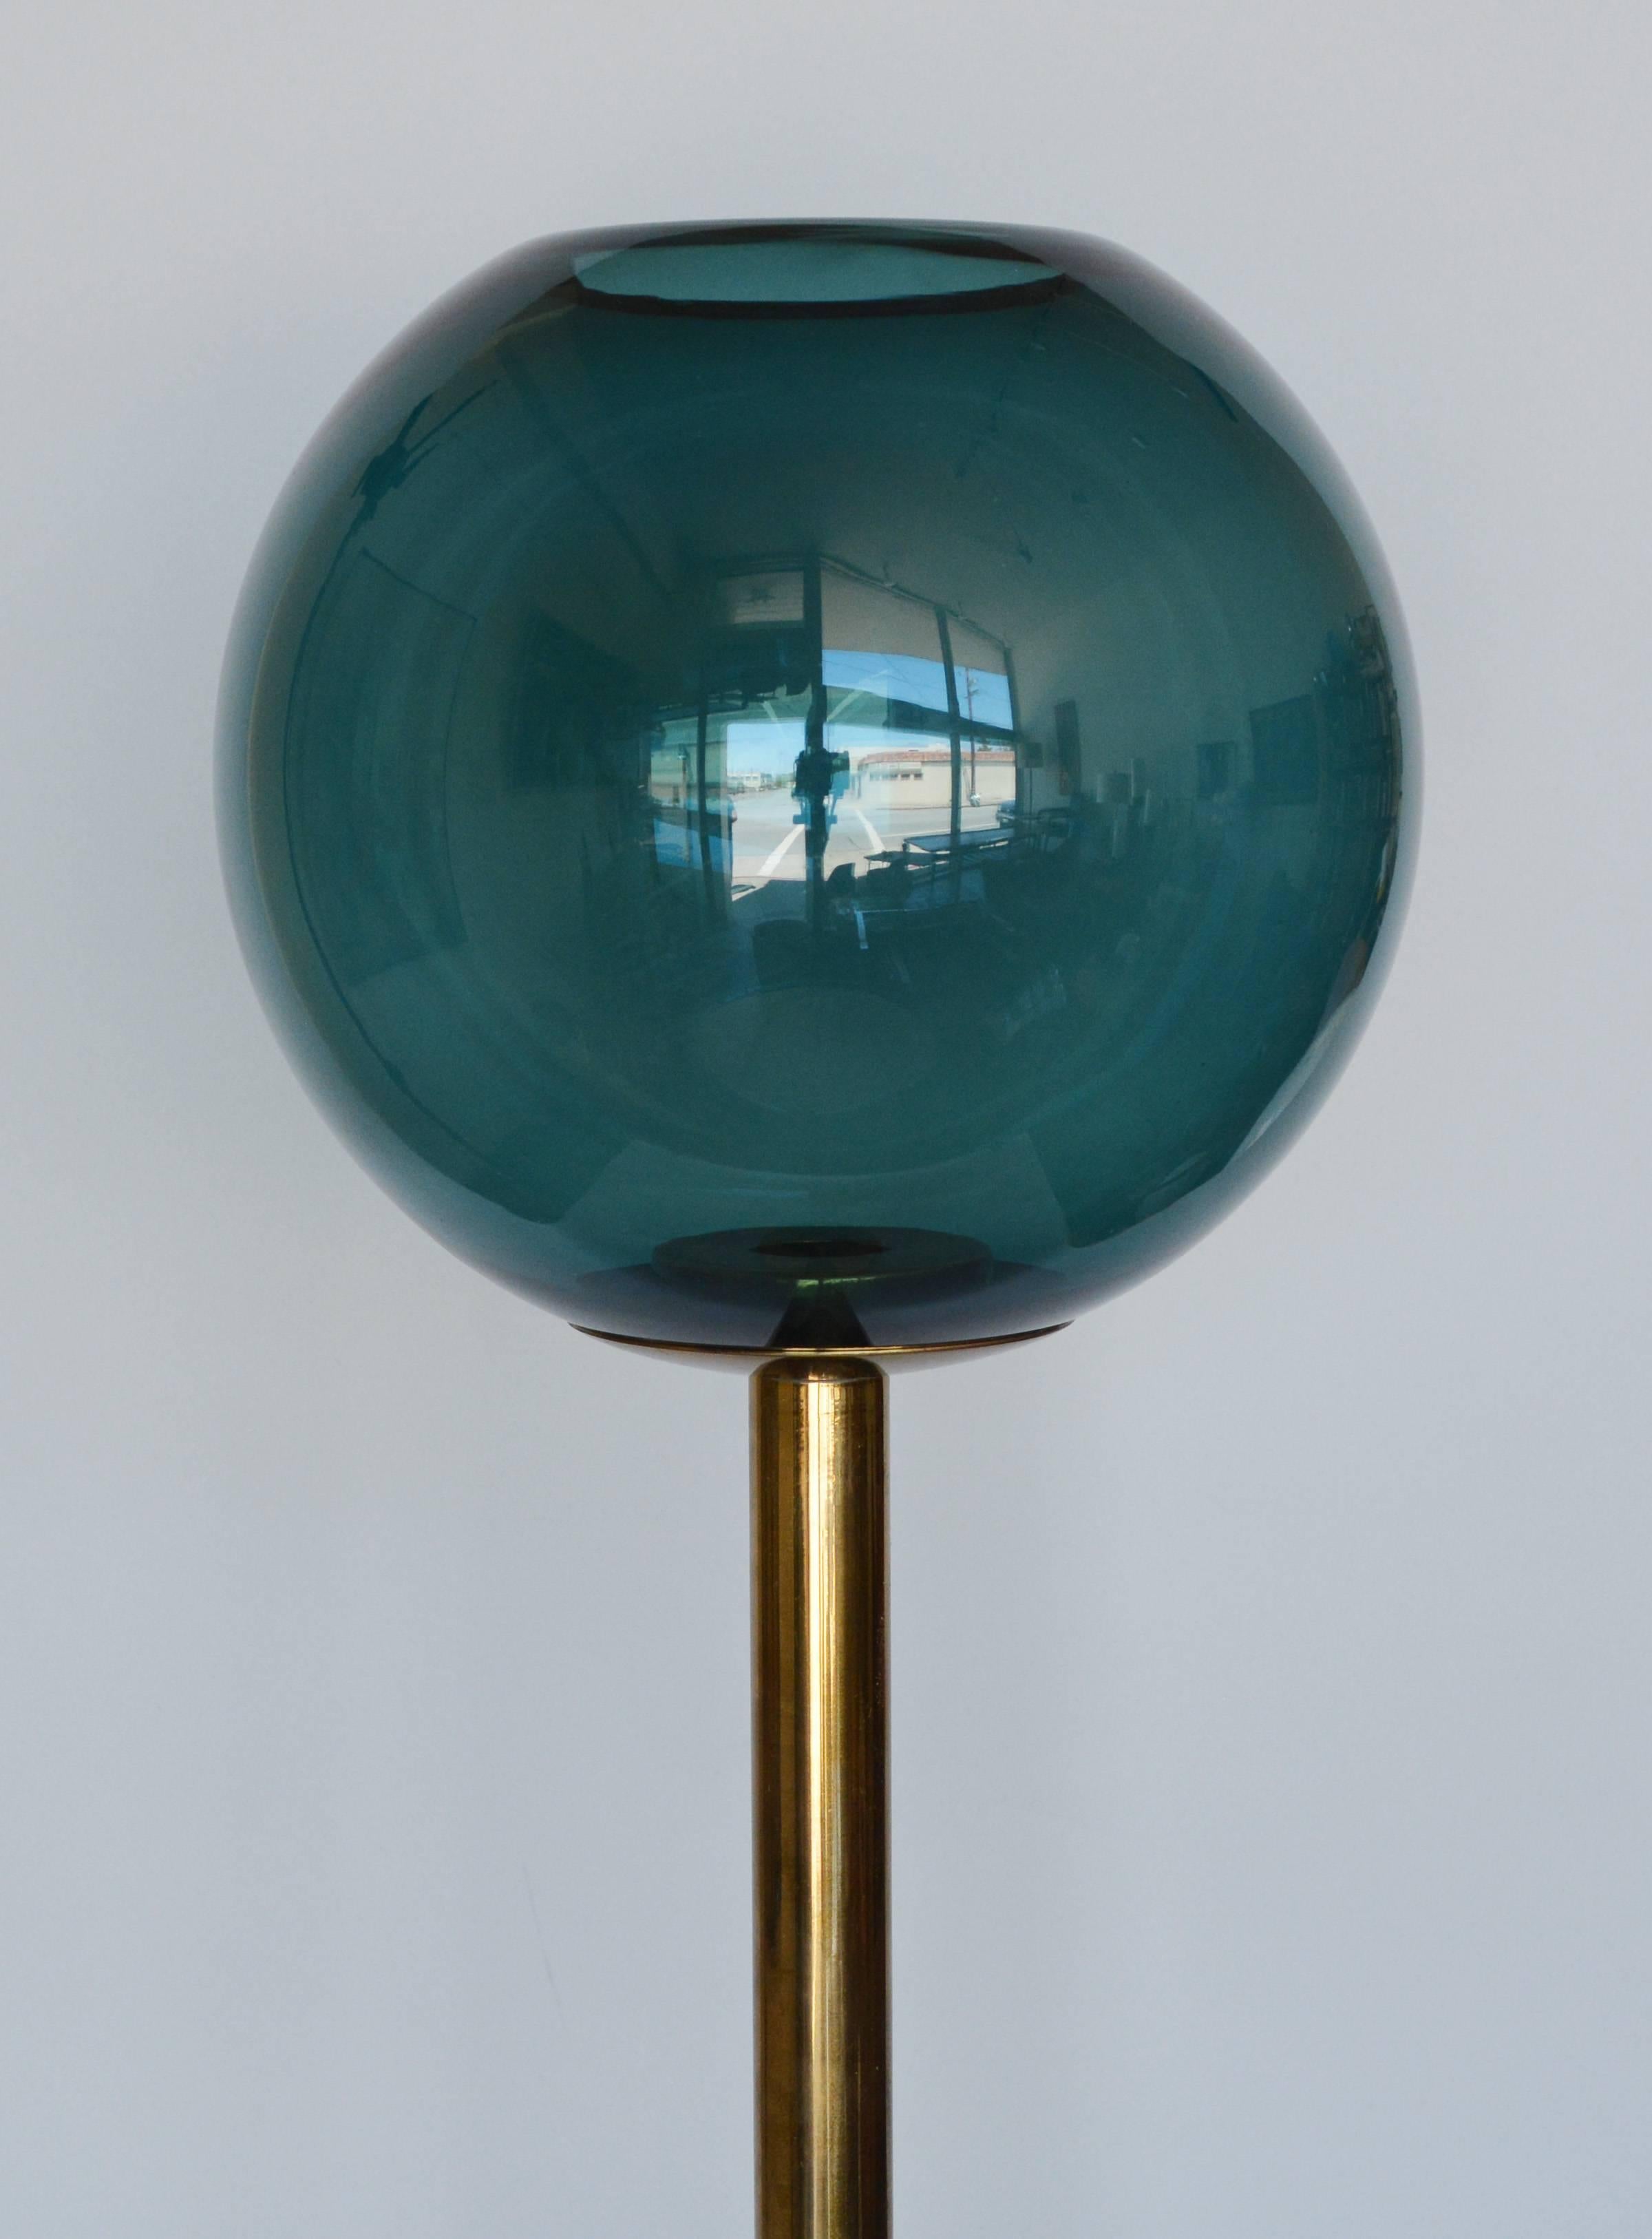 Brass candleholder with a glass globe by Hans Agne Jakobsson. There is a small chip on the rim of the glass and a slight bend in the brass where the globe rests.